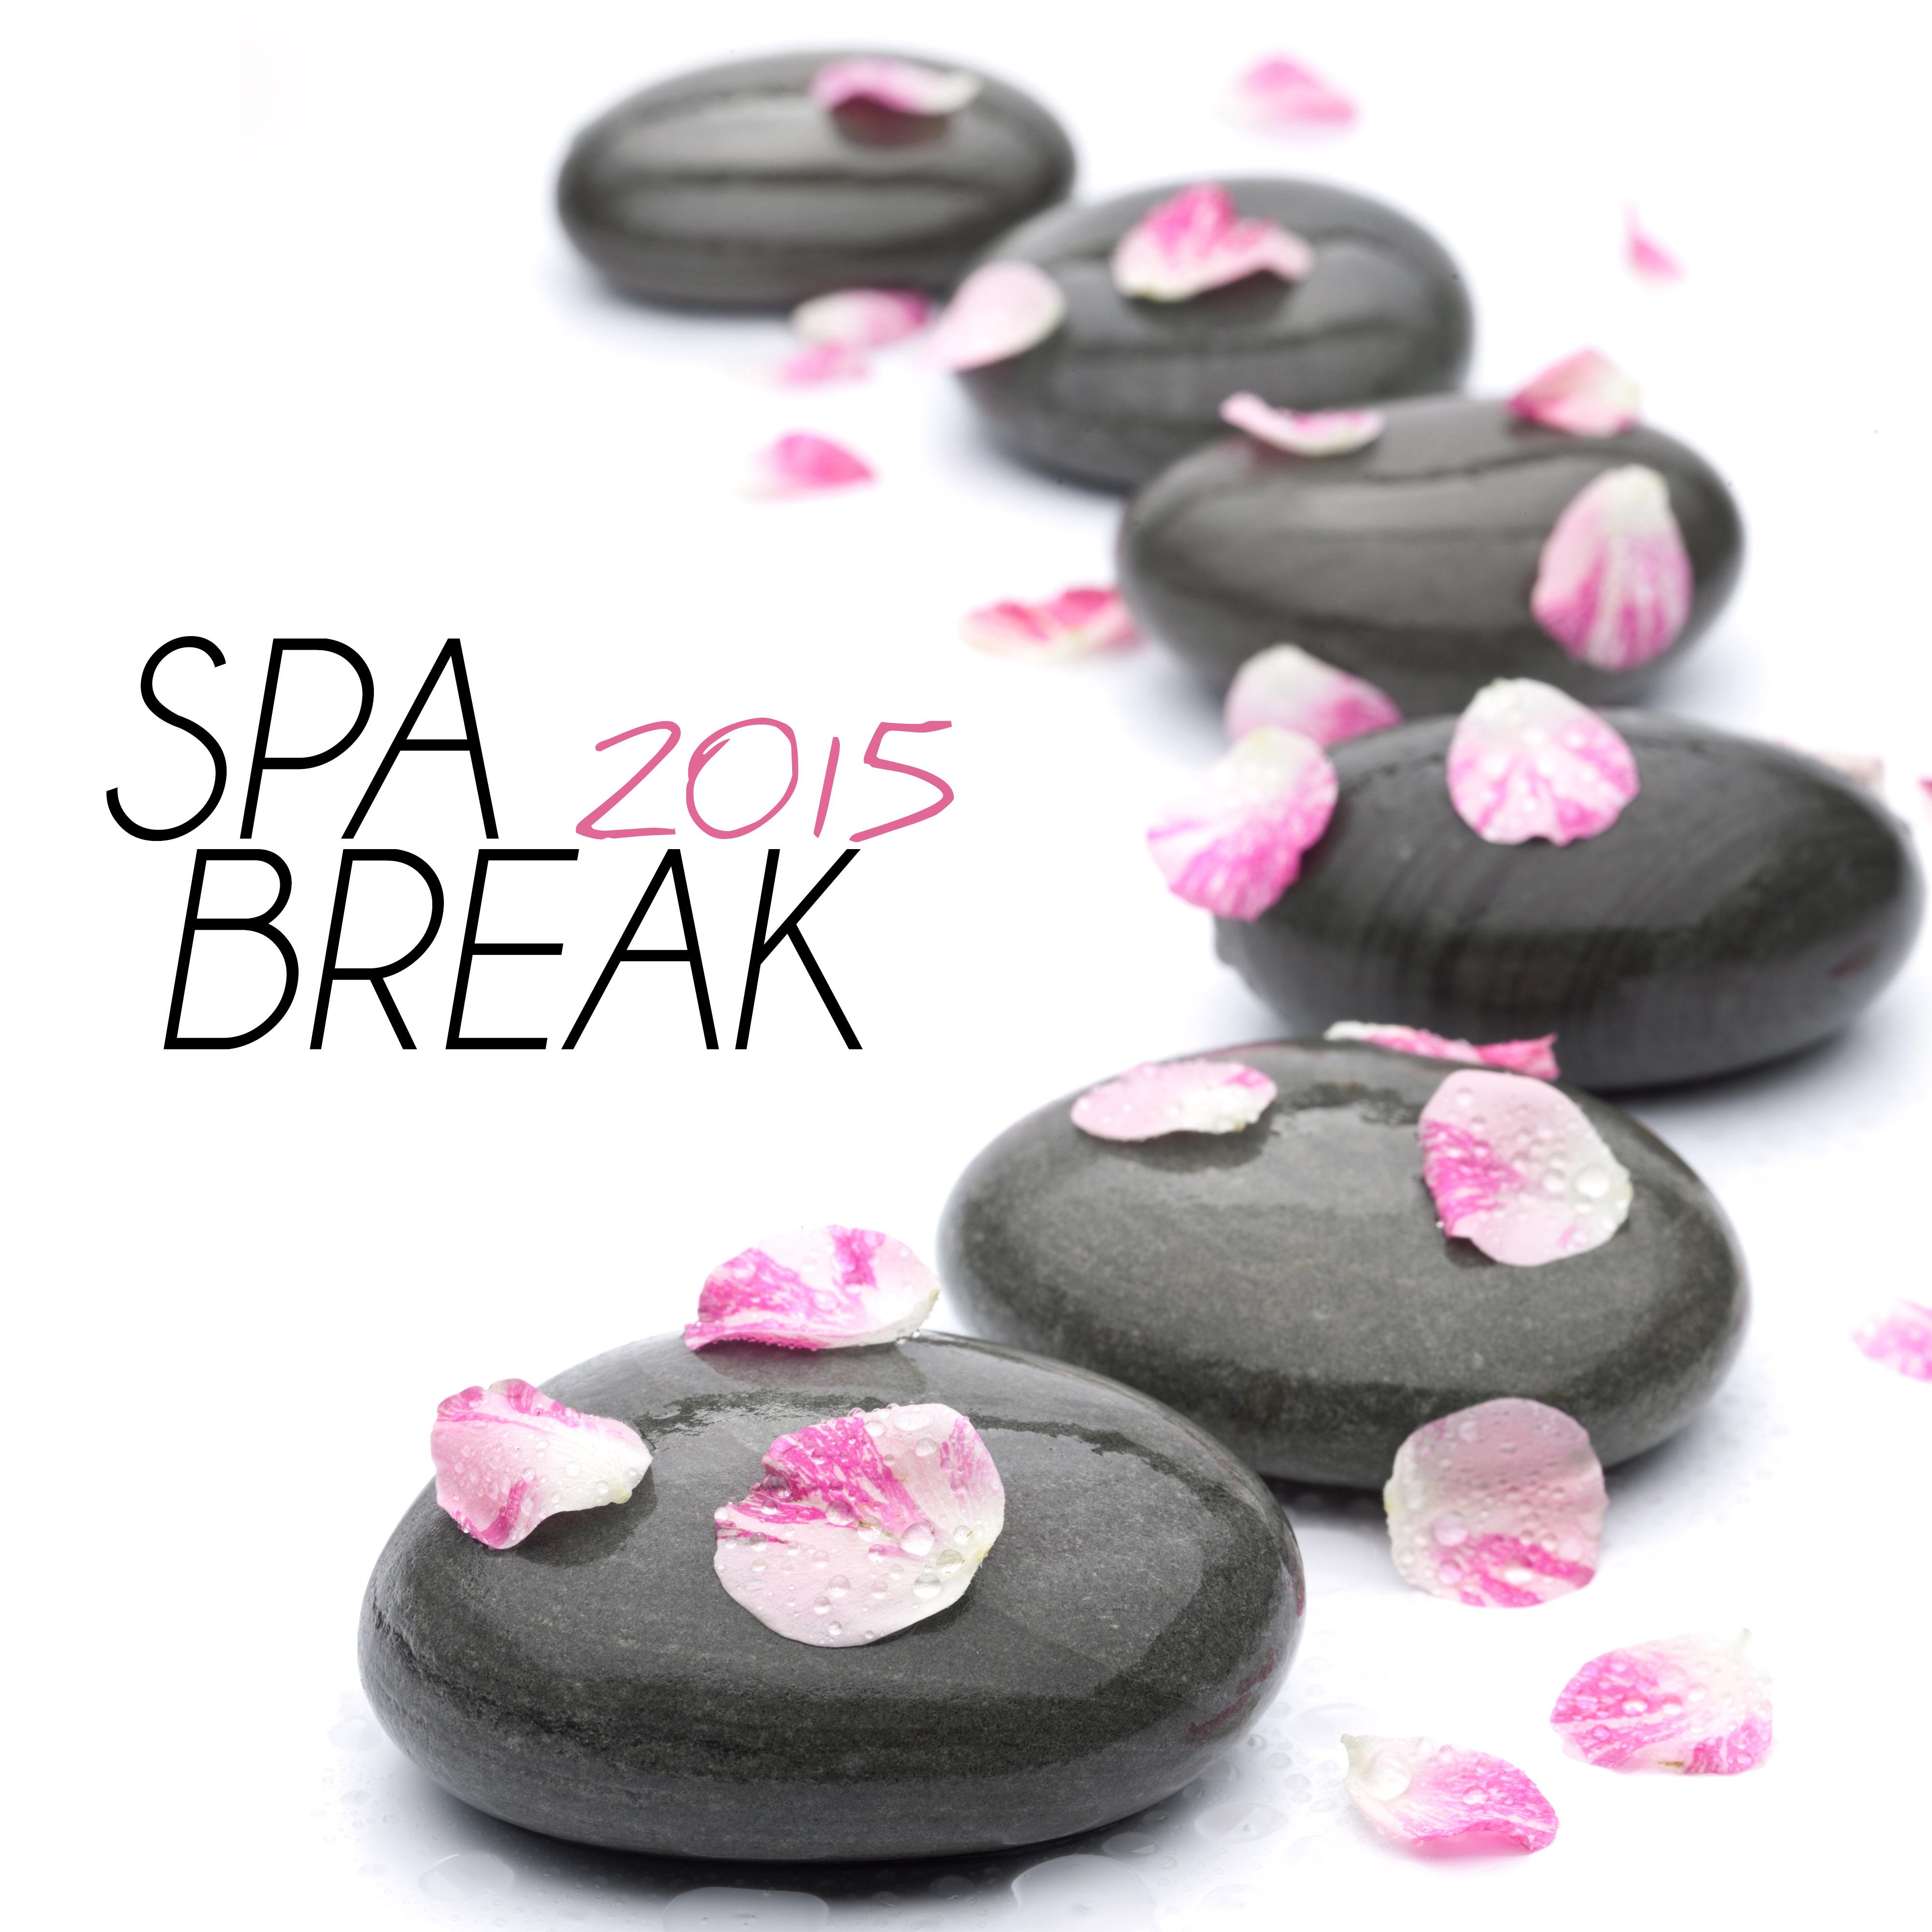 Spa Break 2015 - The Best of Relaxing Spa Music with Sounds of Nature